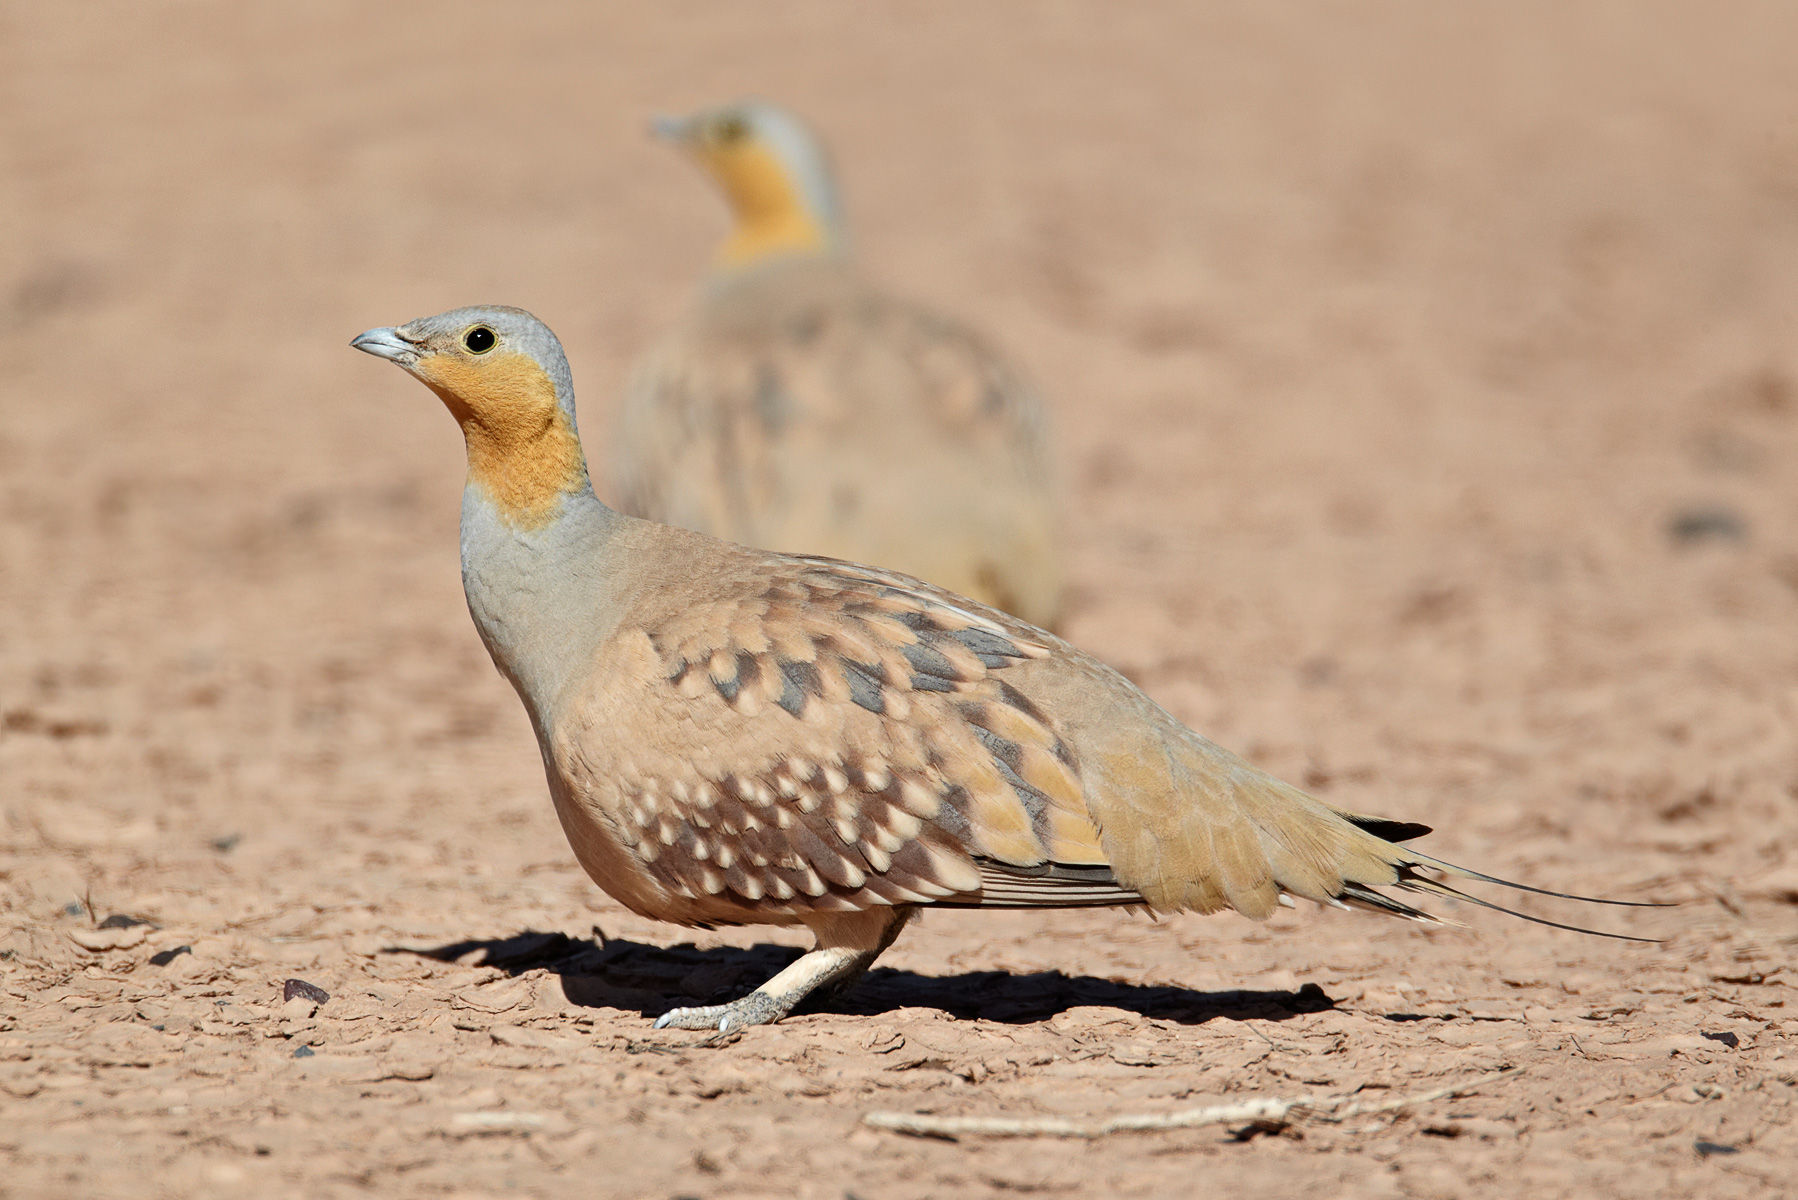 Pretty Spotted sandgrouse